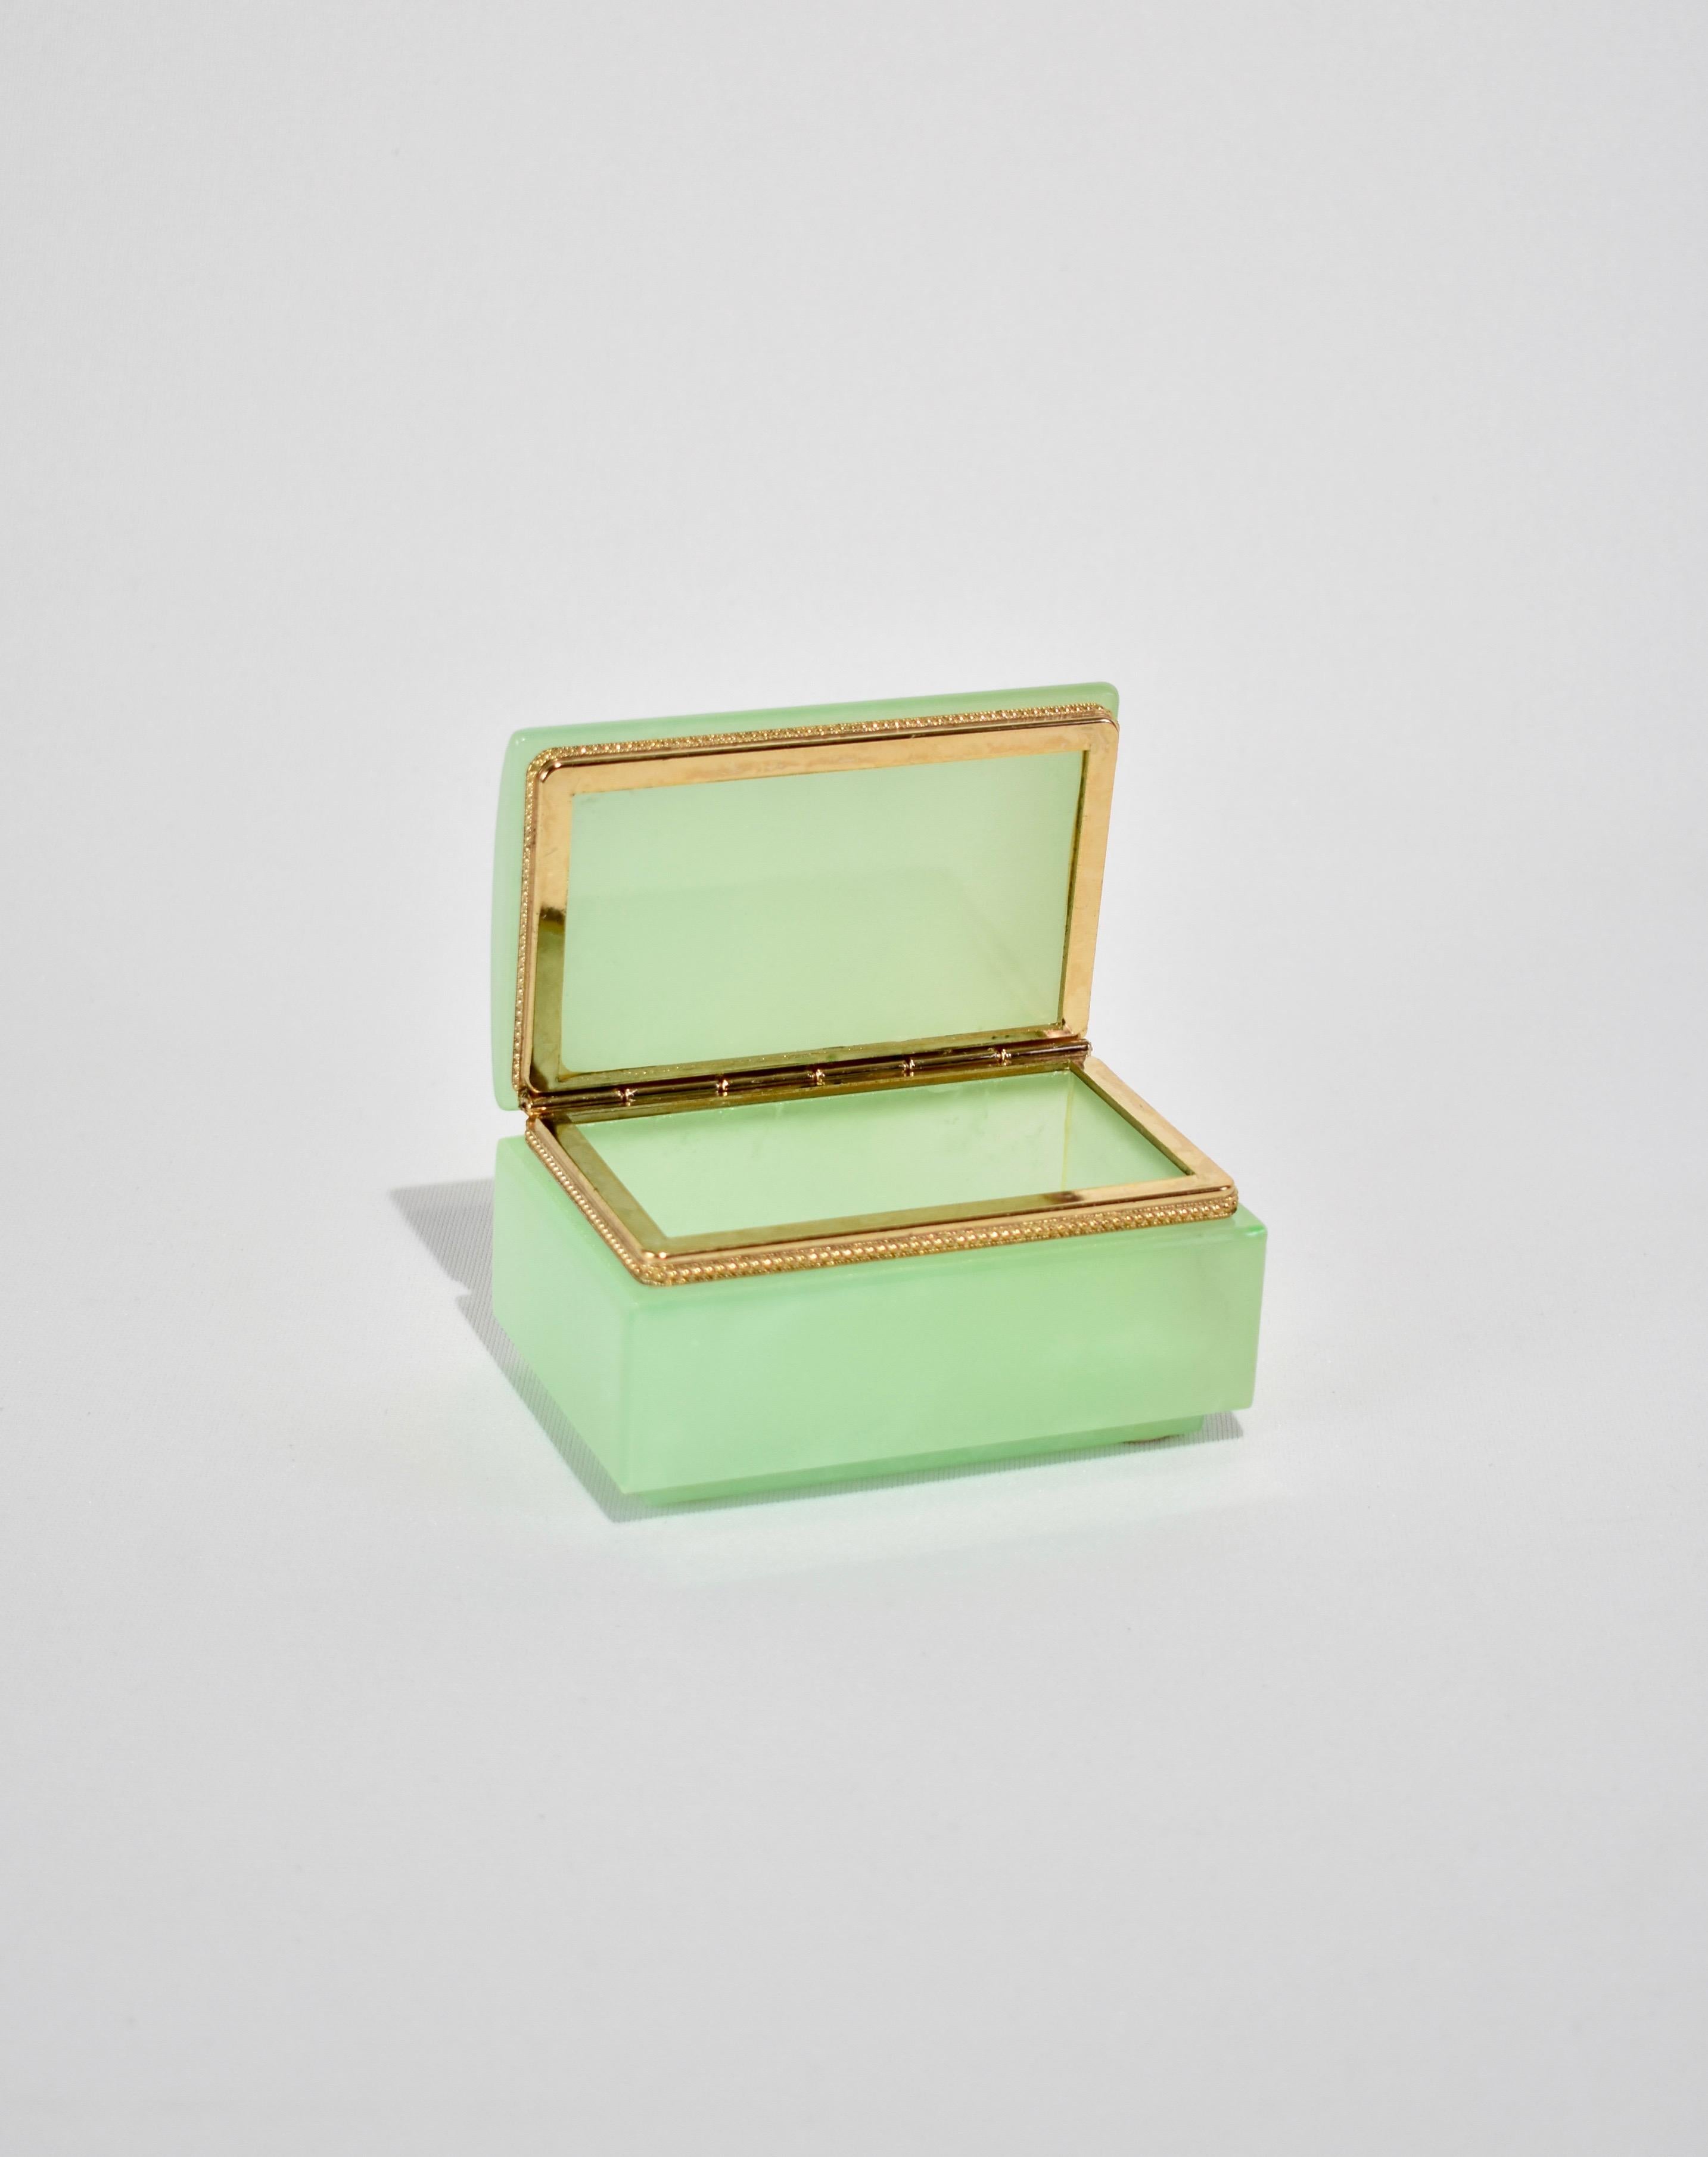 Beautiful green alabaster hinged jewelry box. Made in Italy.